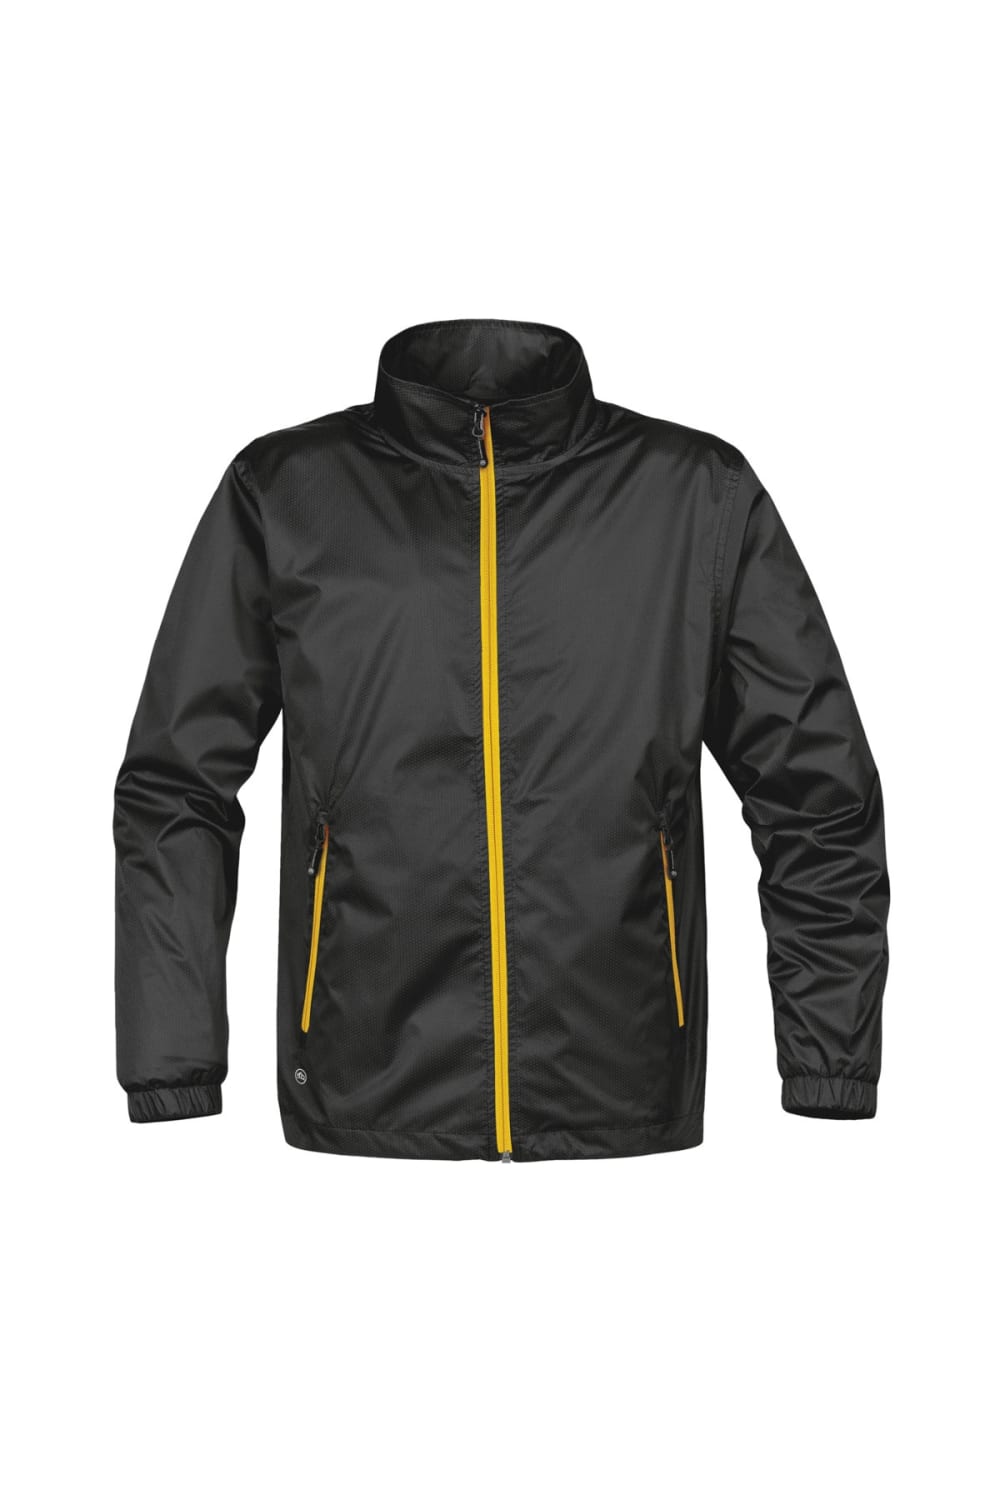 Stormtech Mens Axis Lightweight Shell Jacket (Waterproof And Breathable) (Black/Sundance)